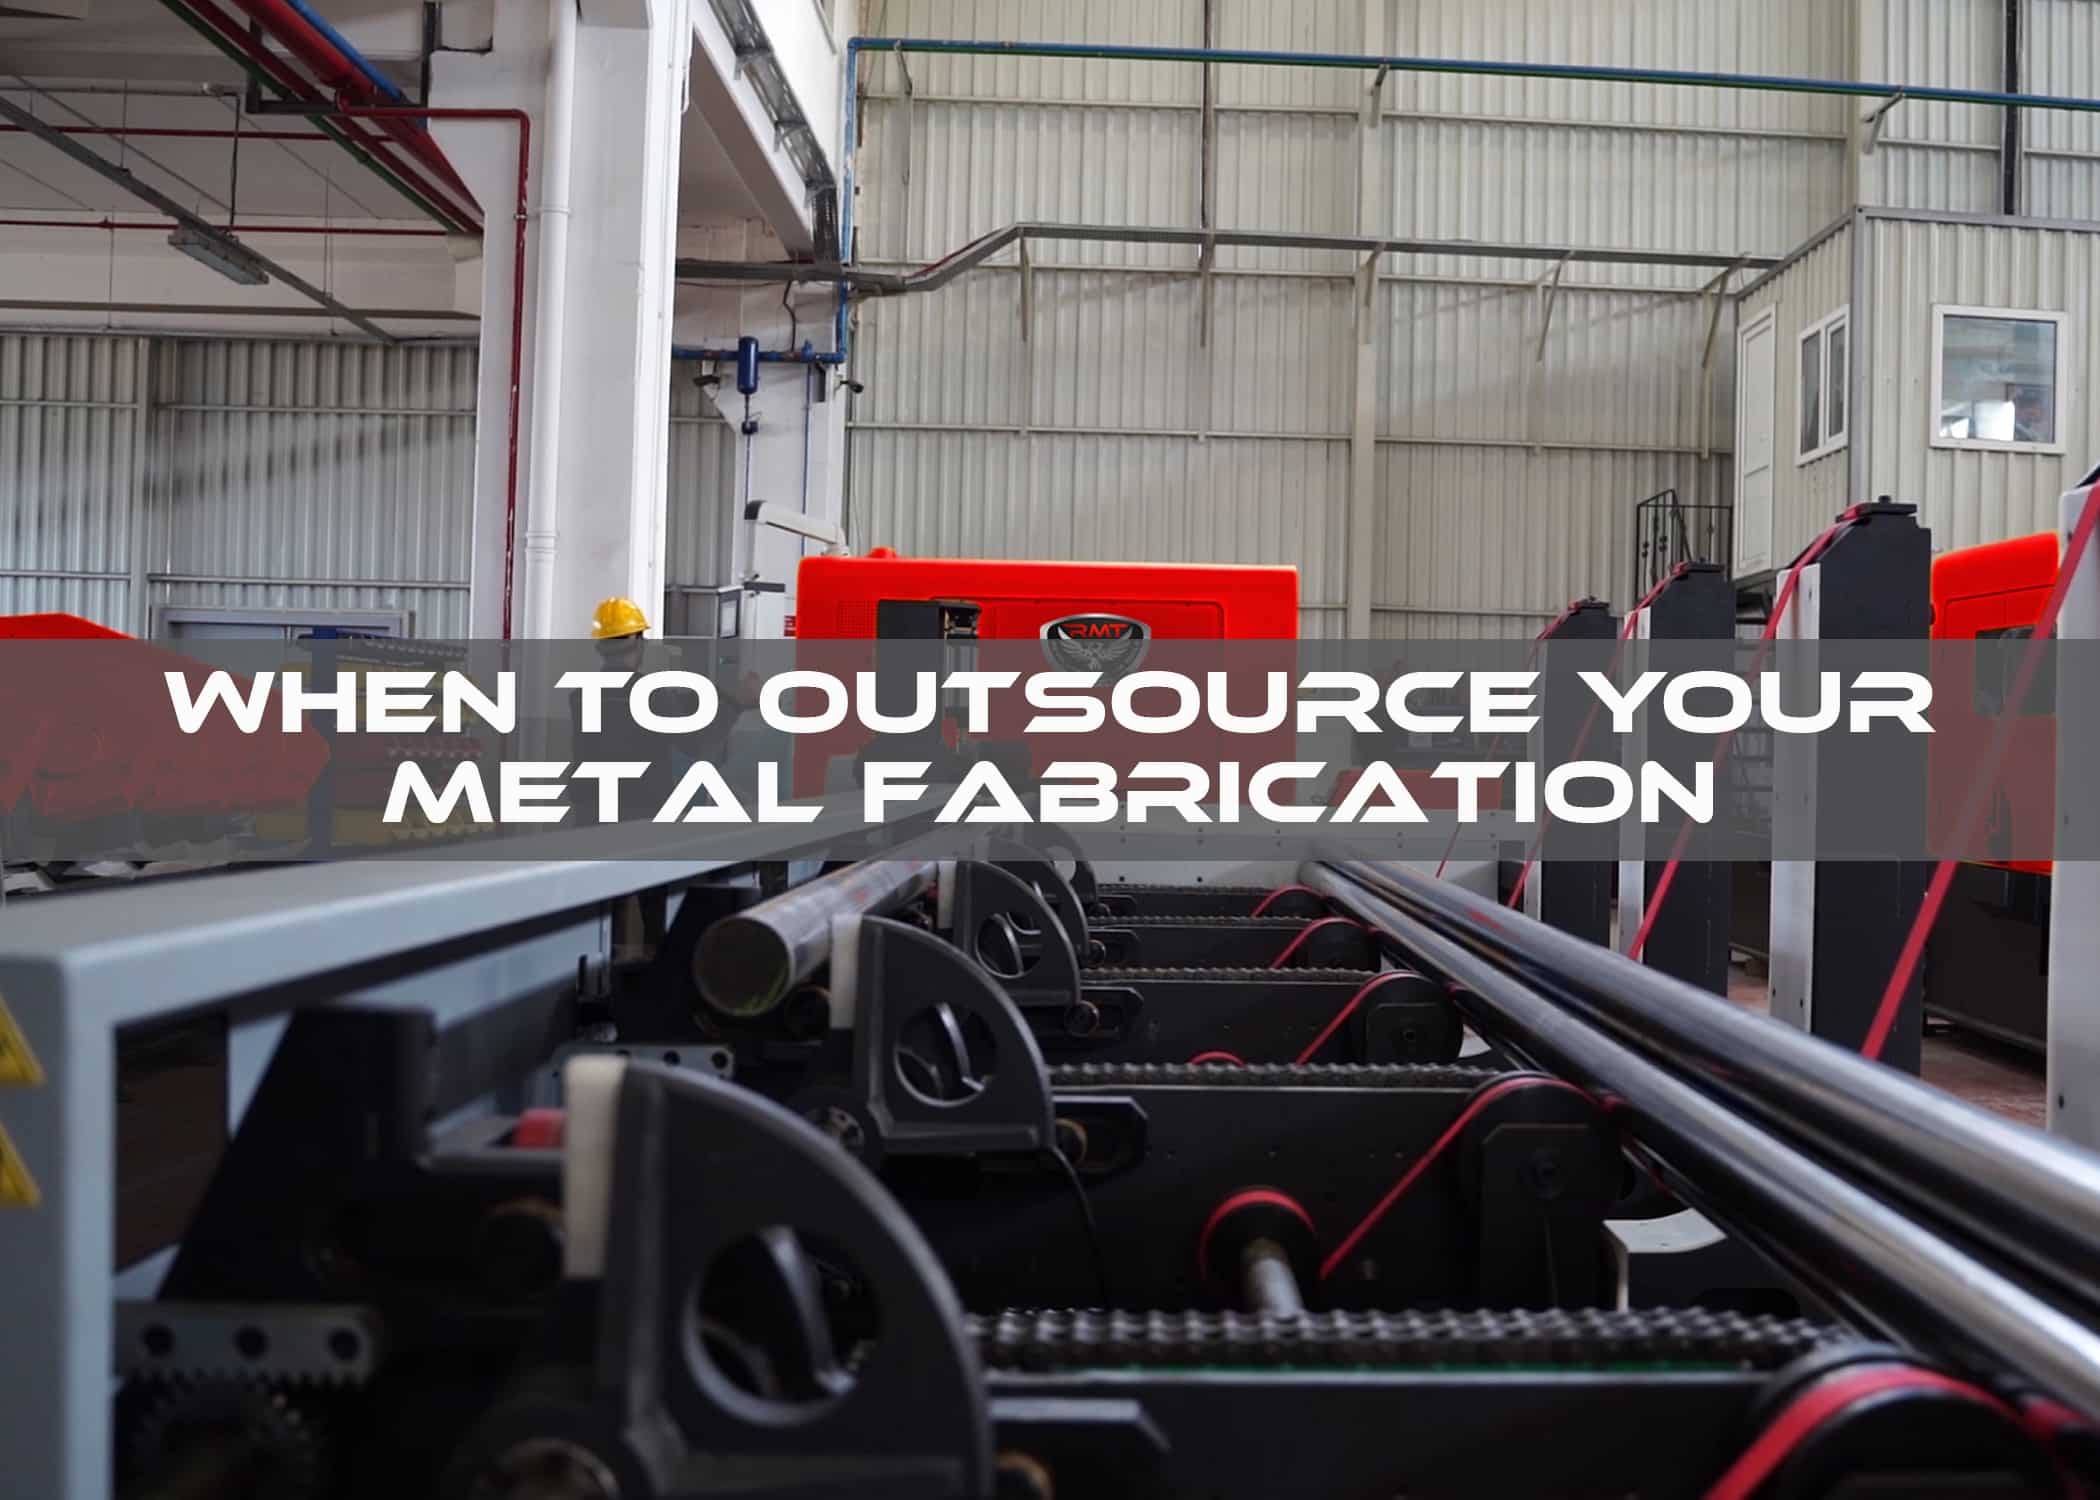 When to outsource your metal fabrication featured